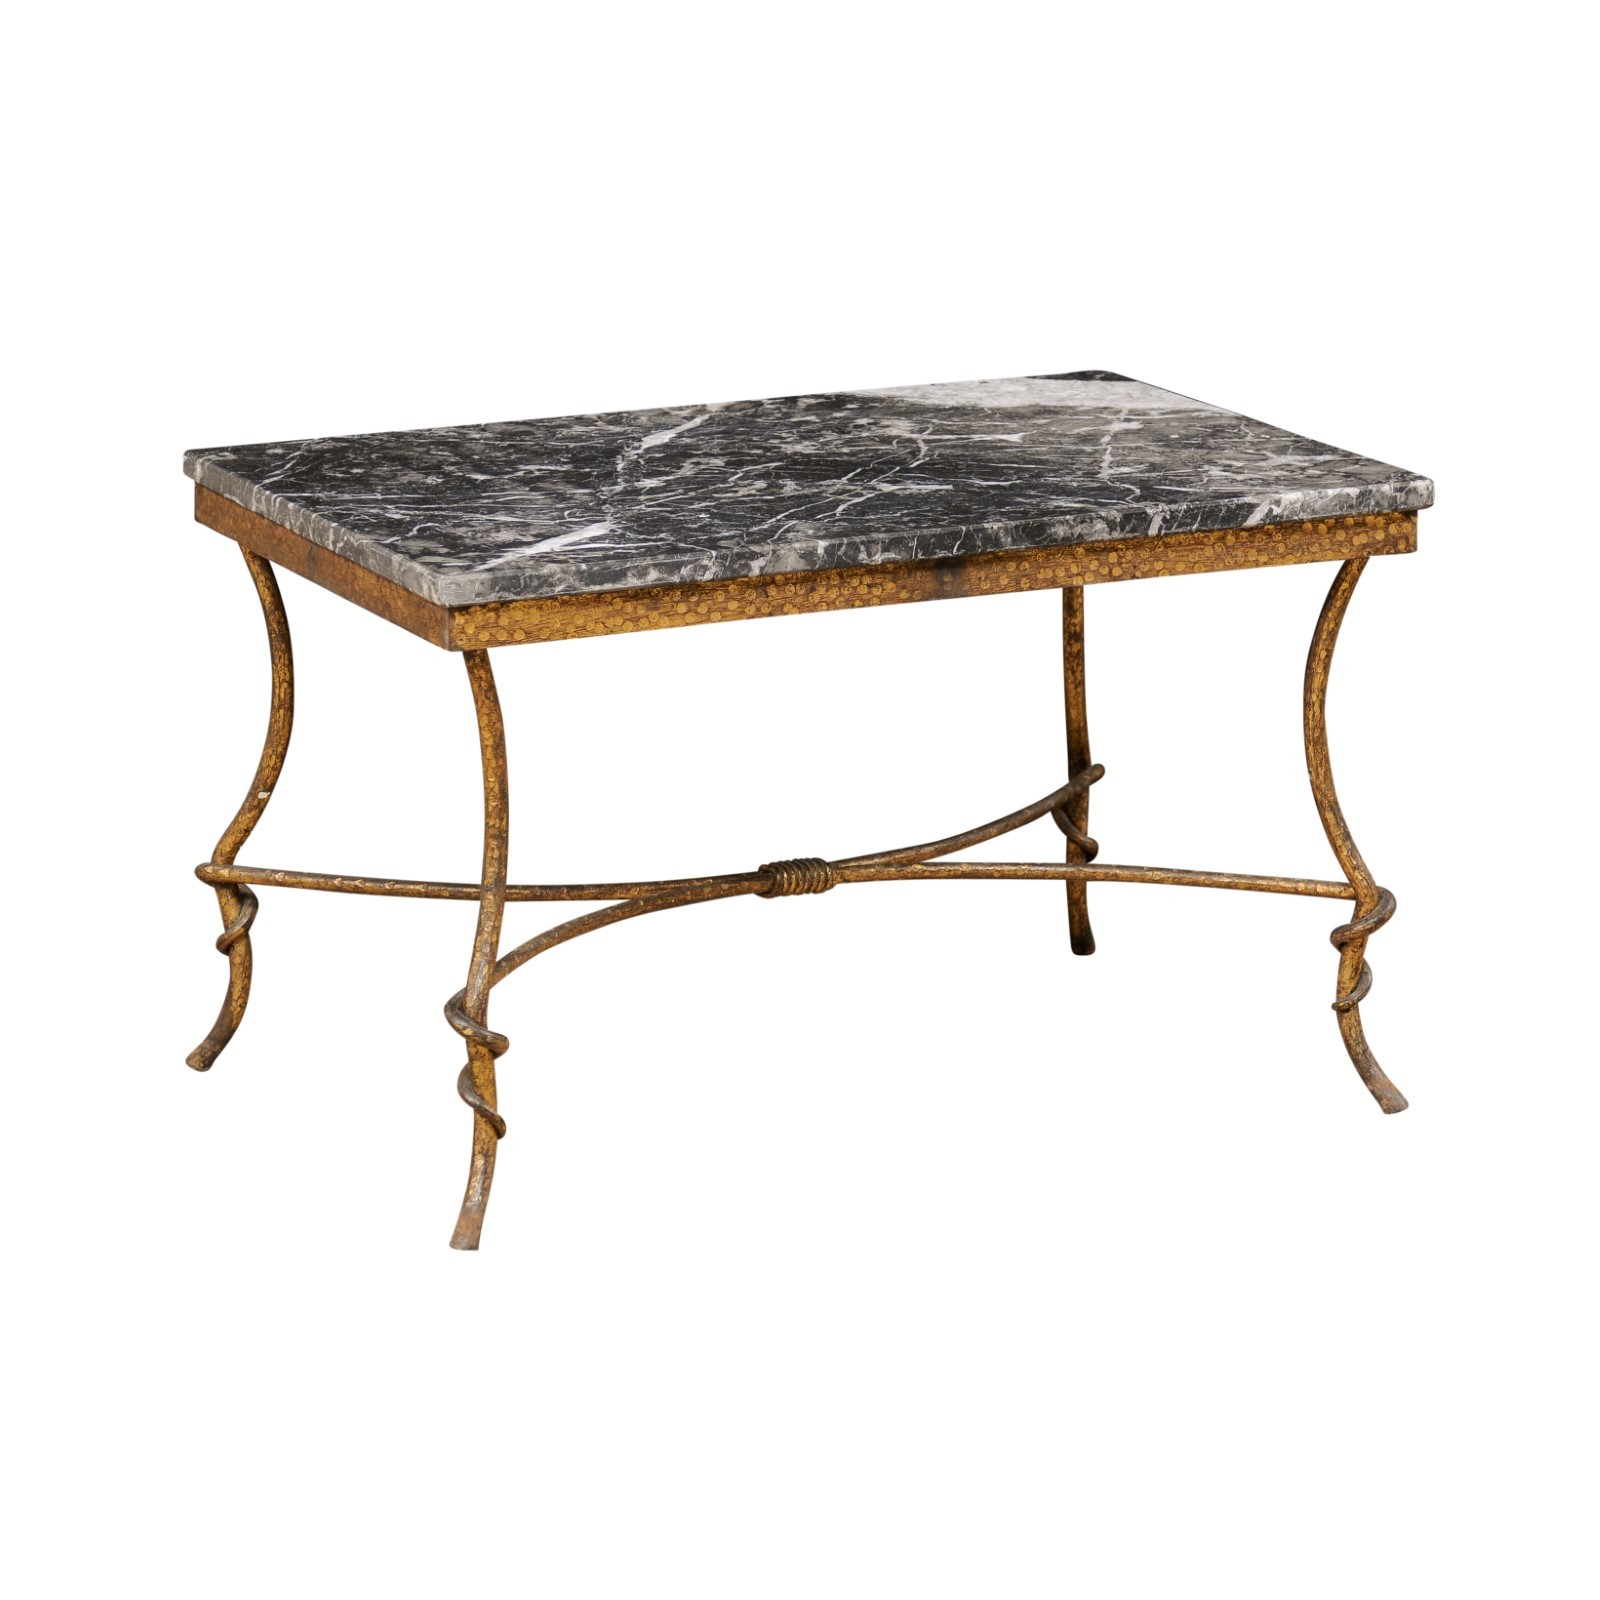 Spanish Gold/Iron Coffee Table w/Marble Top